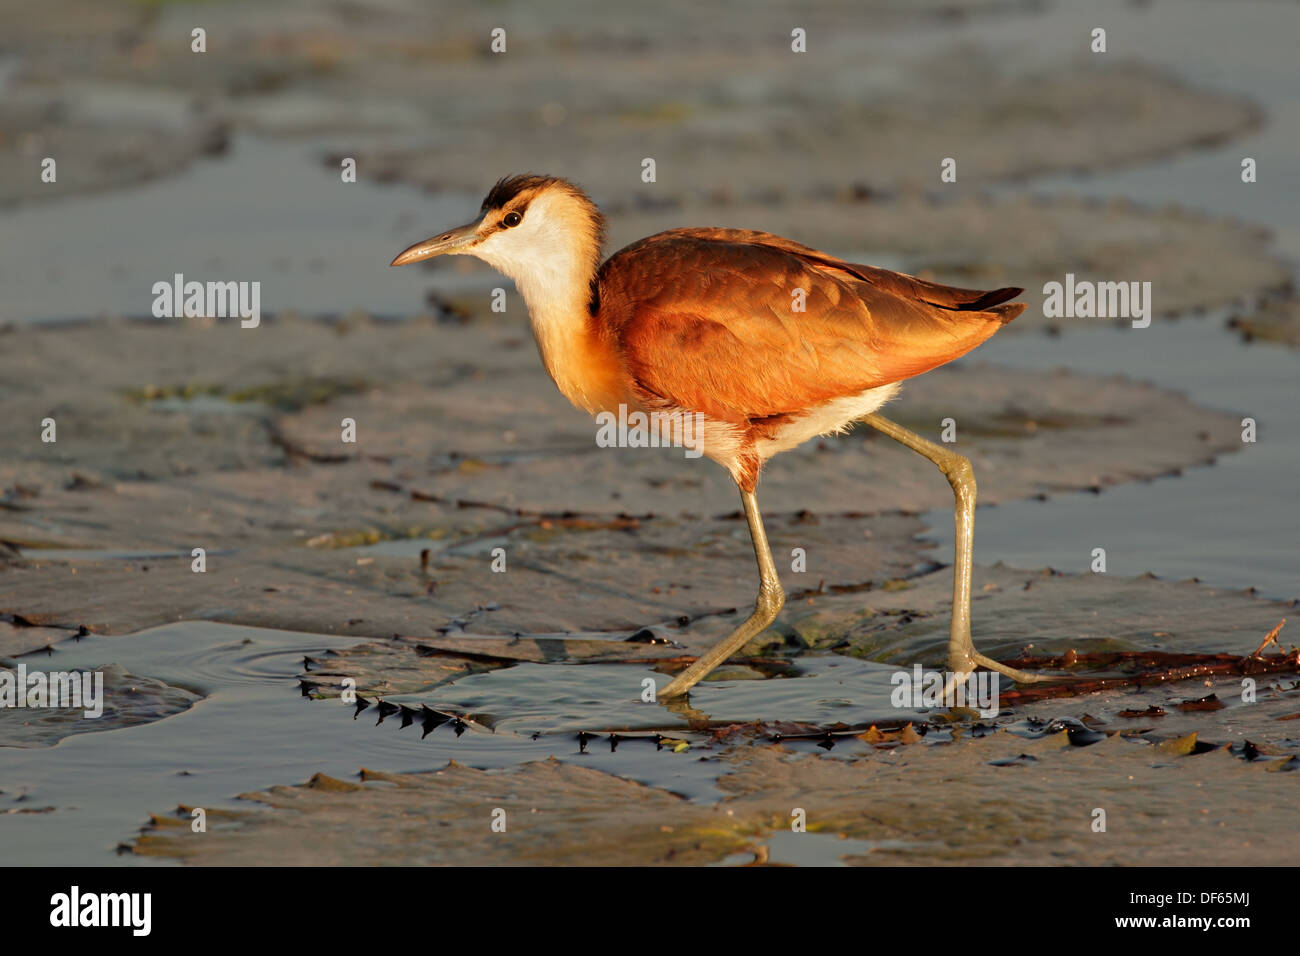 African Jacana (Actophilornis africana) on a water lily leaf, southern Africa Stock Photo